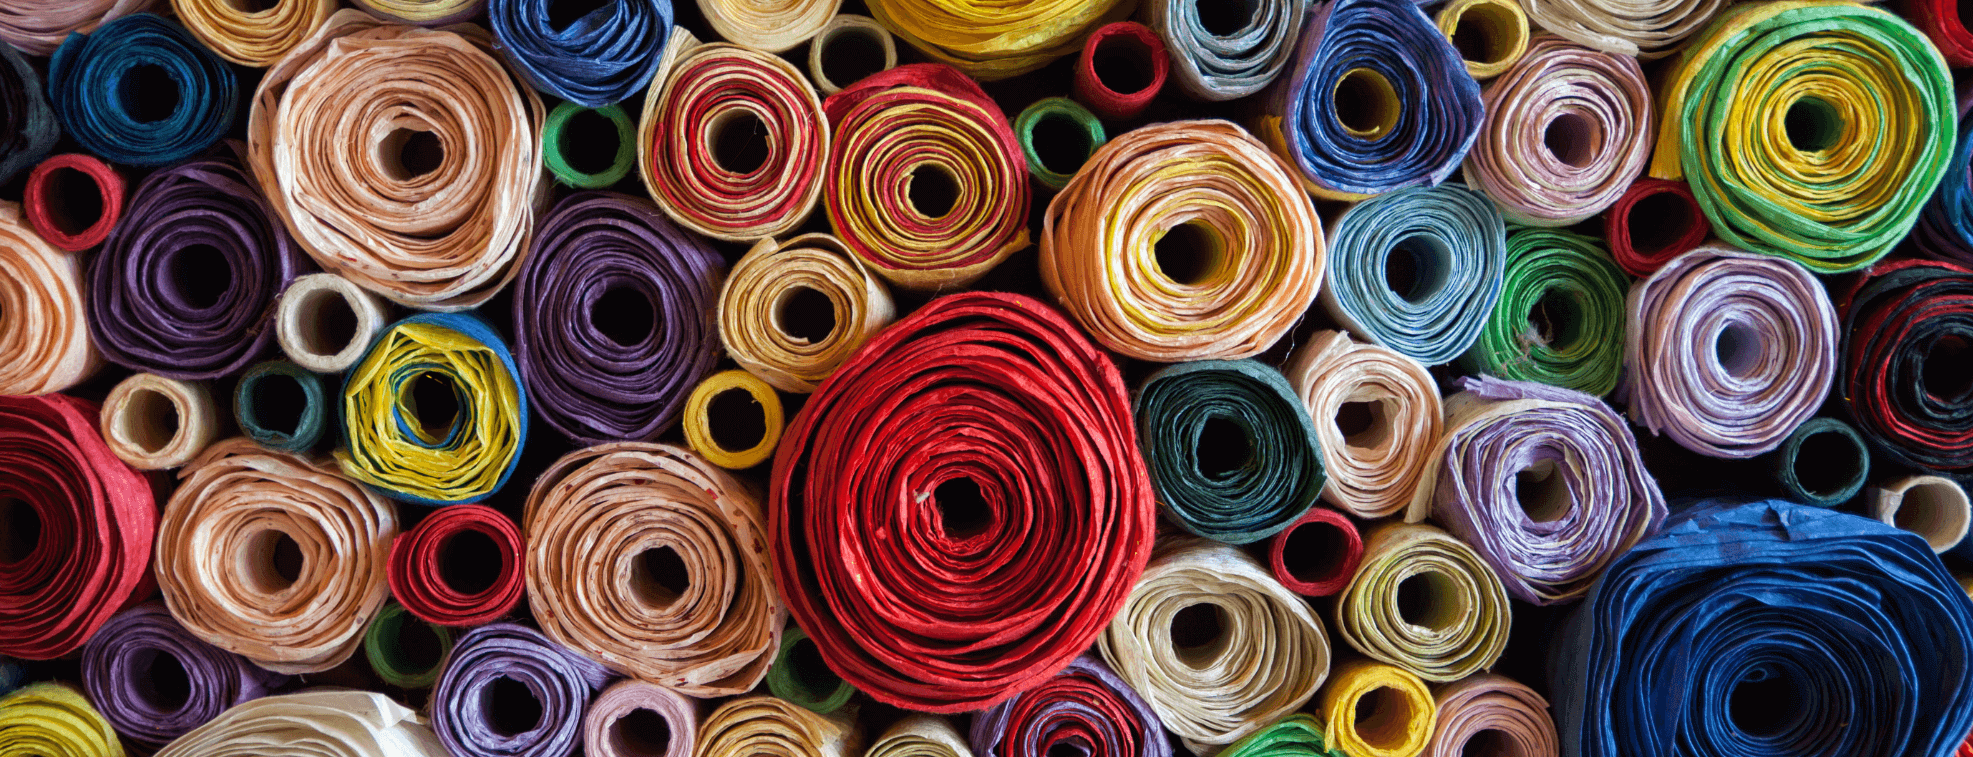 Carefully organized colorful rolls of textile